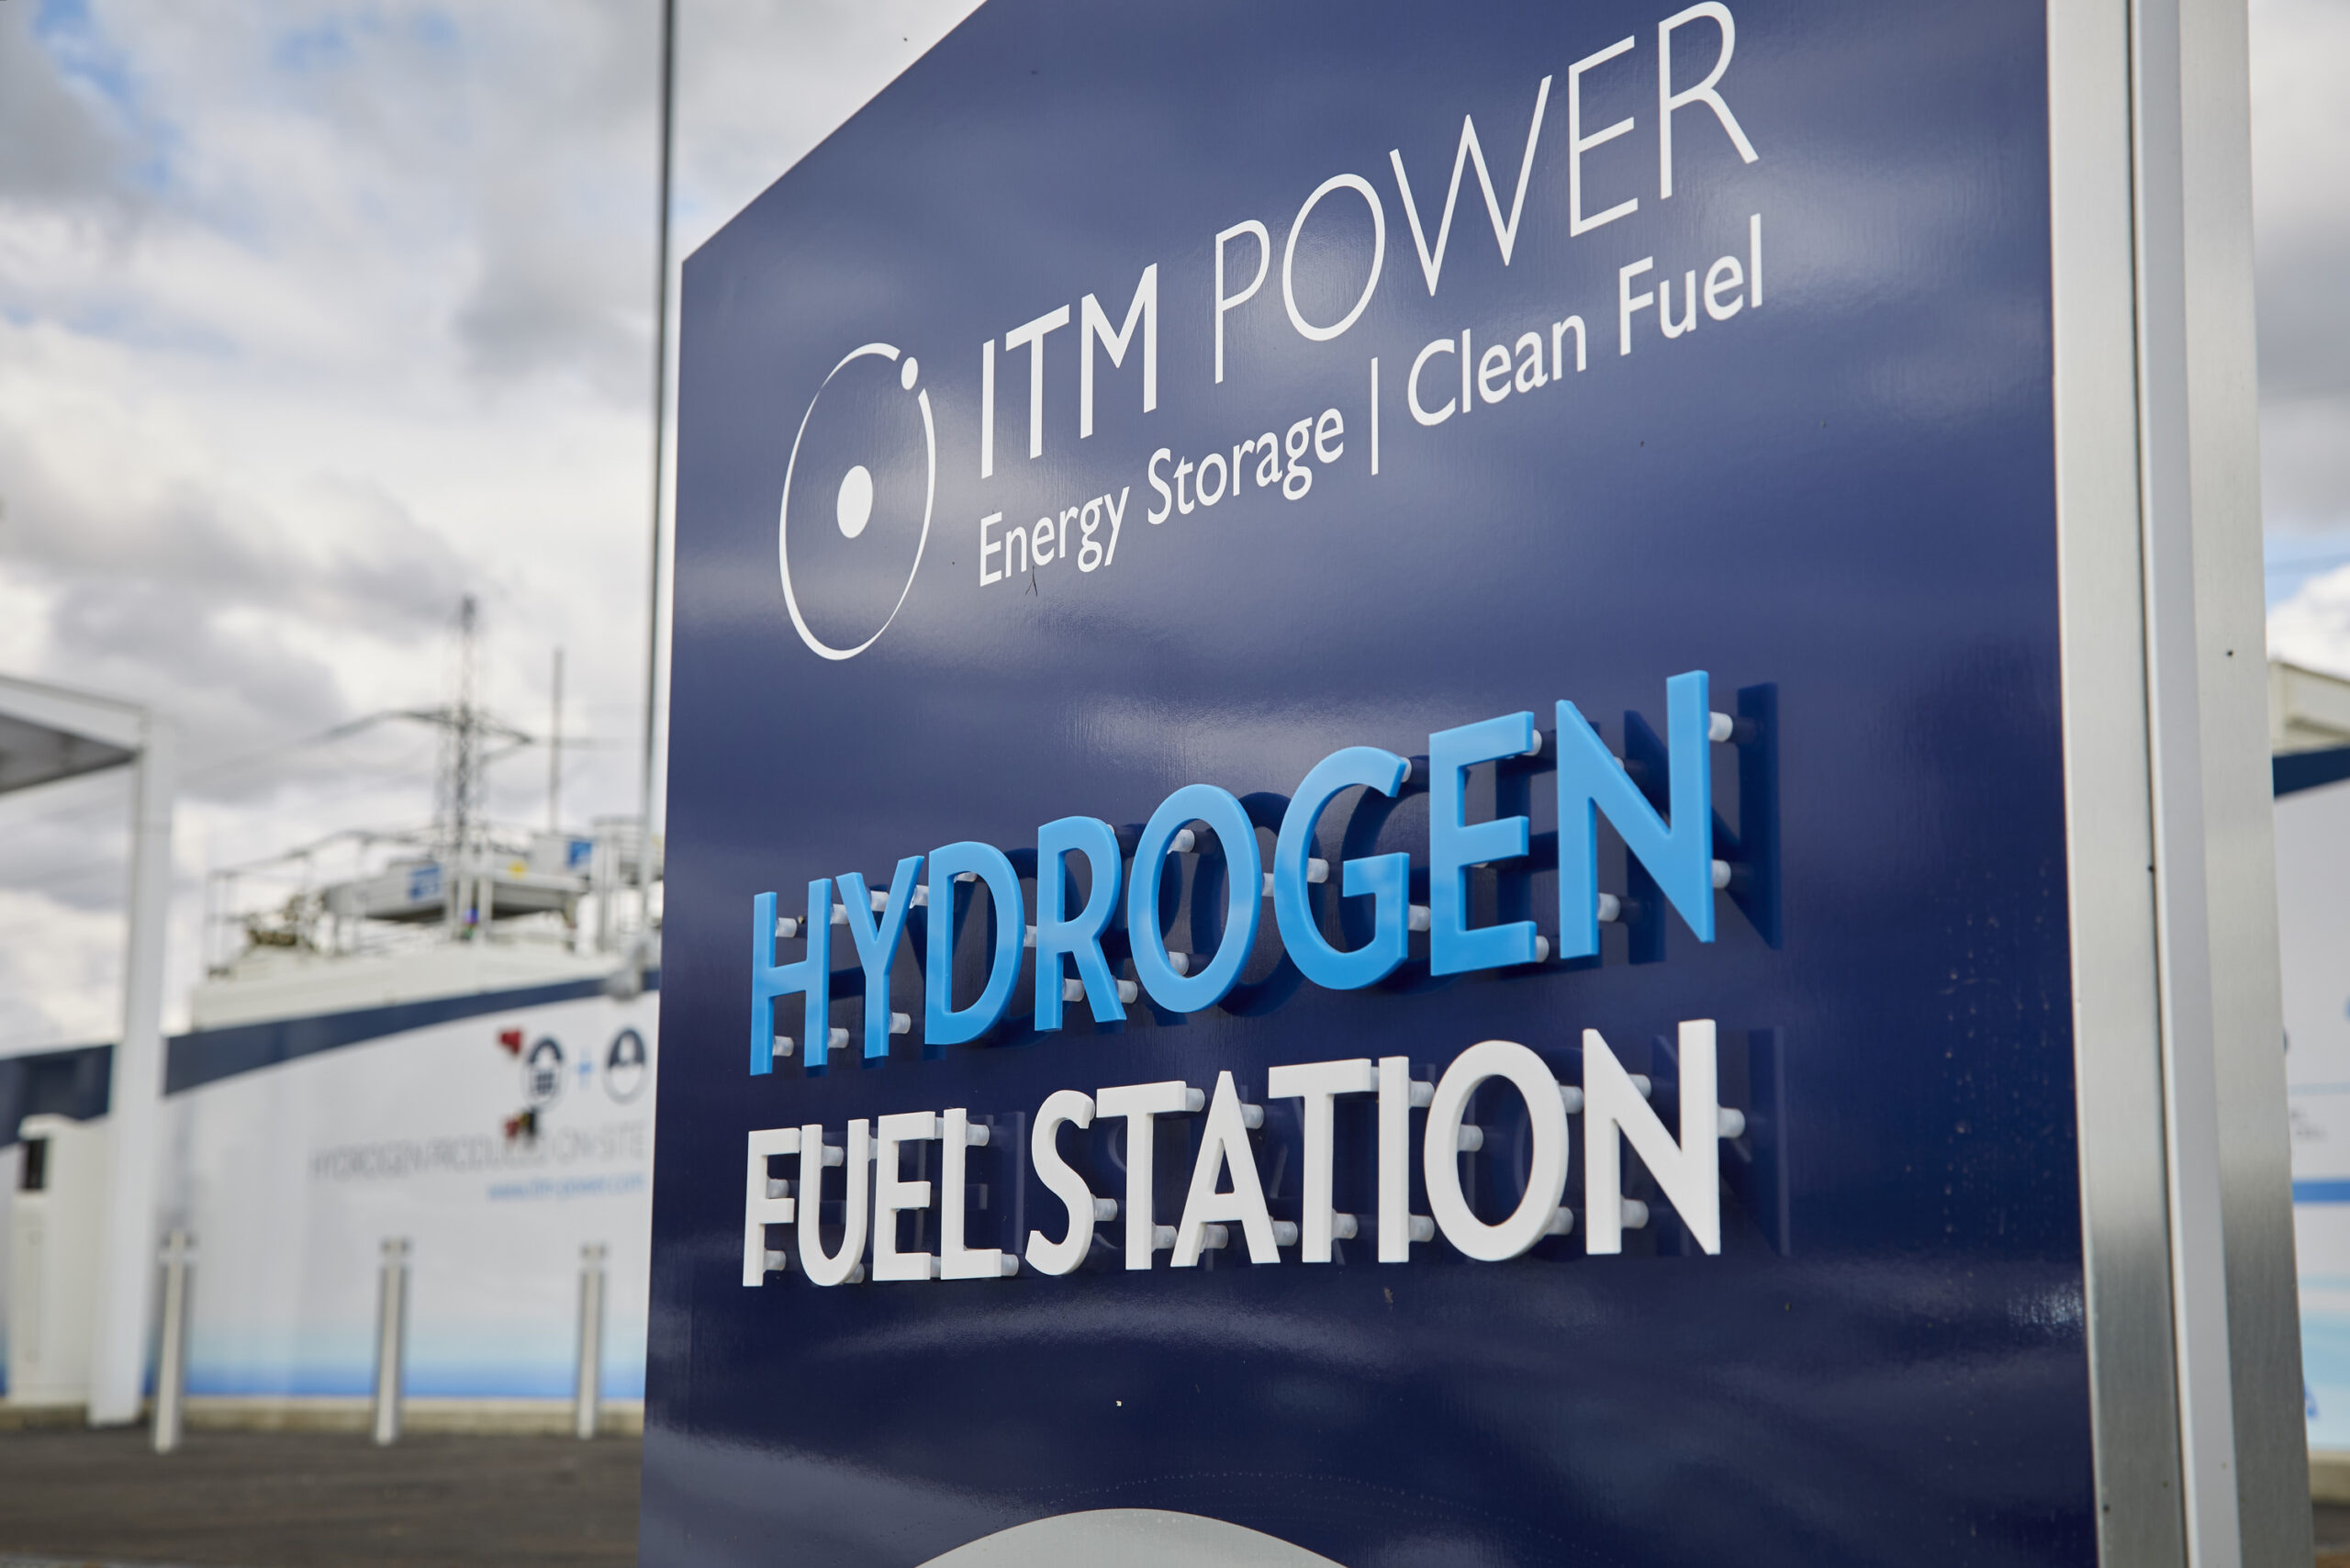 A picture of a blue sign with white lettering outside of a power plant. The sign says "ITM Power. Energy Storage | Clean Fuel. Hydrogen Fuel Station."